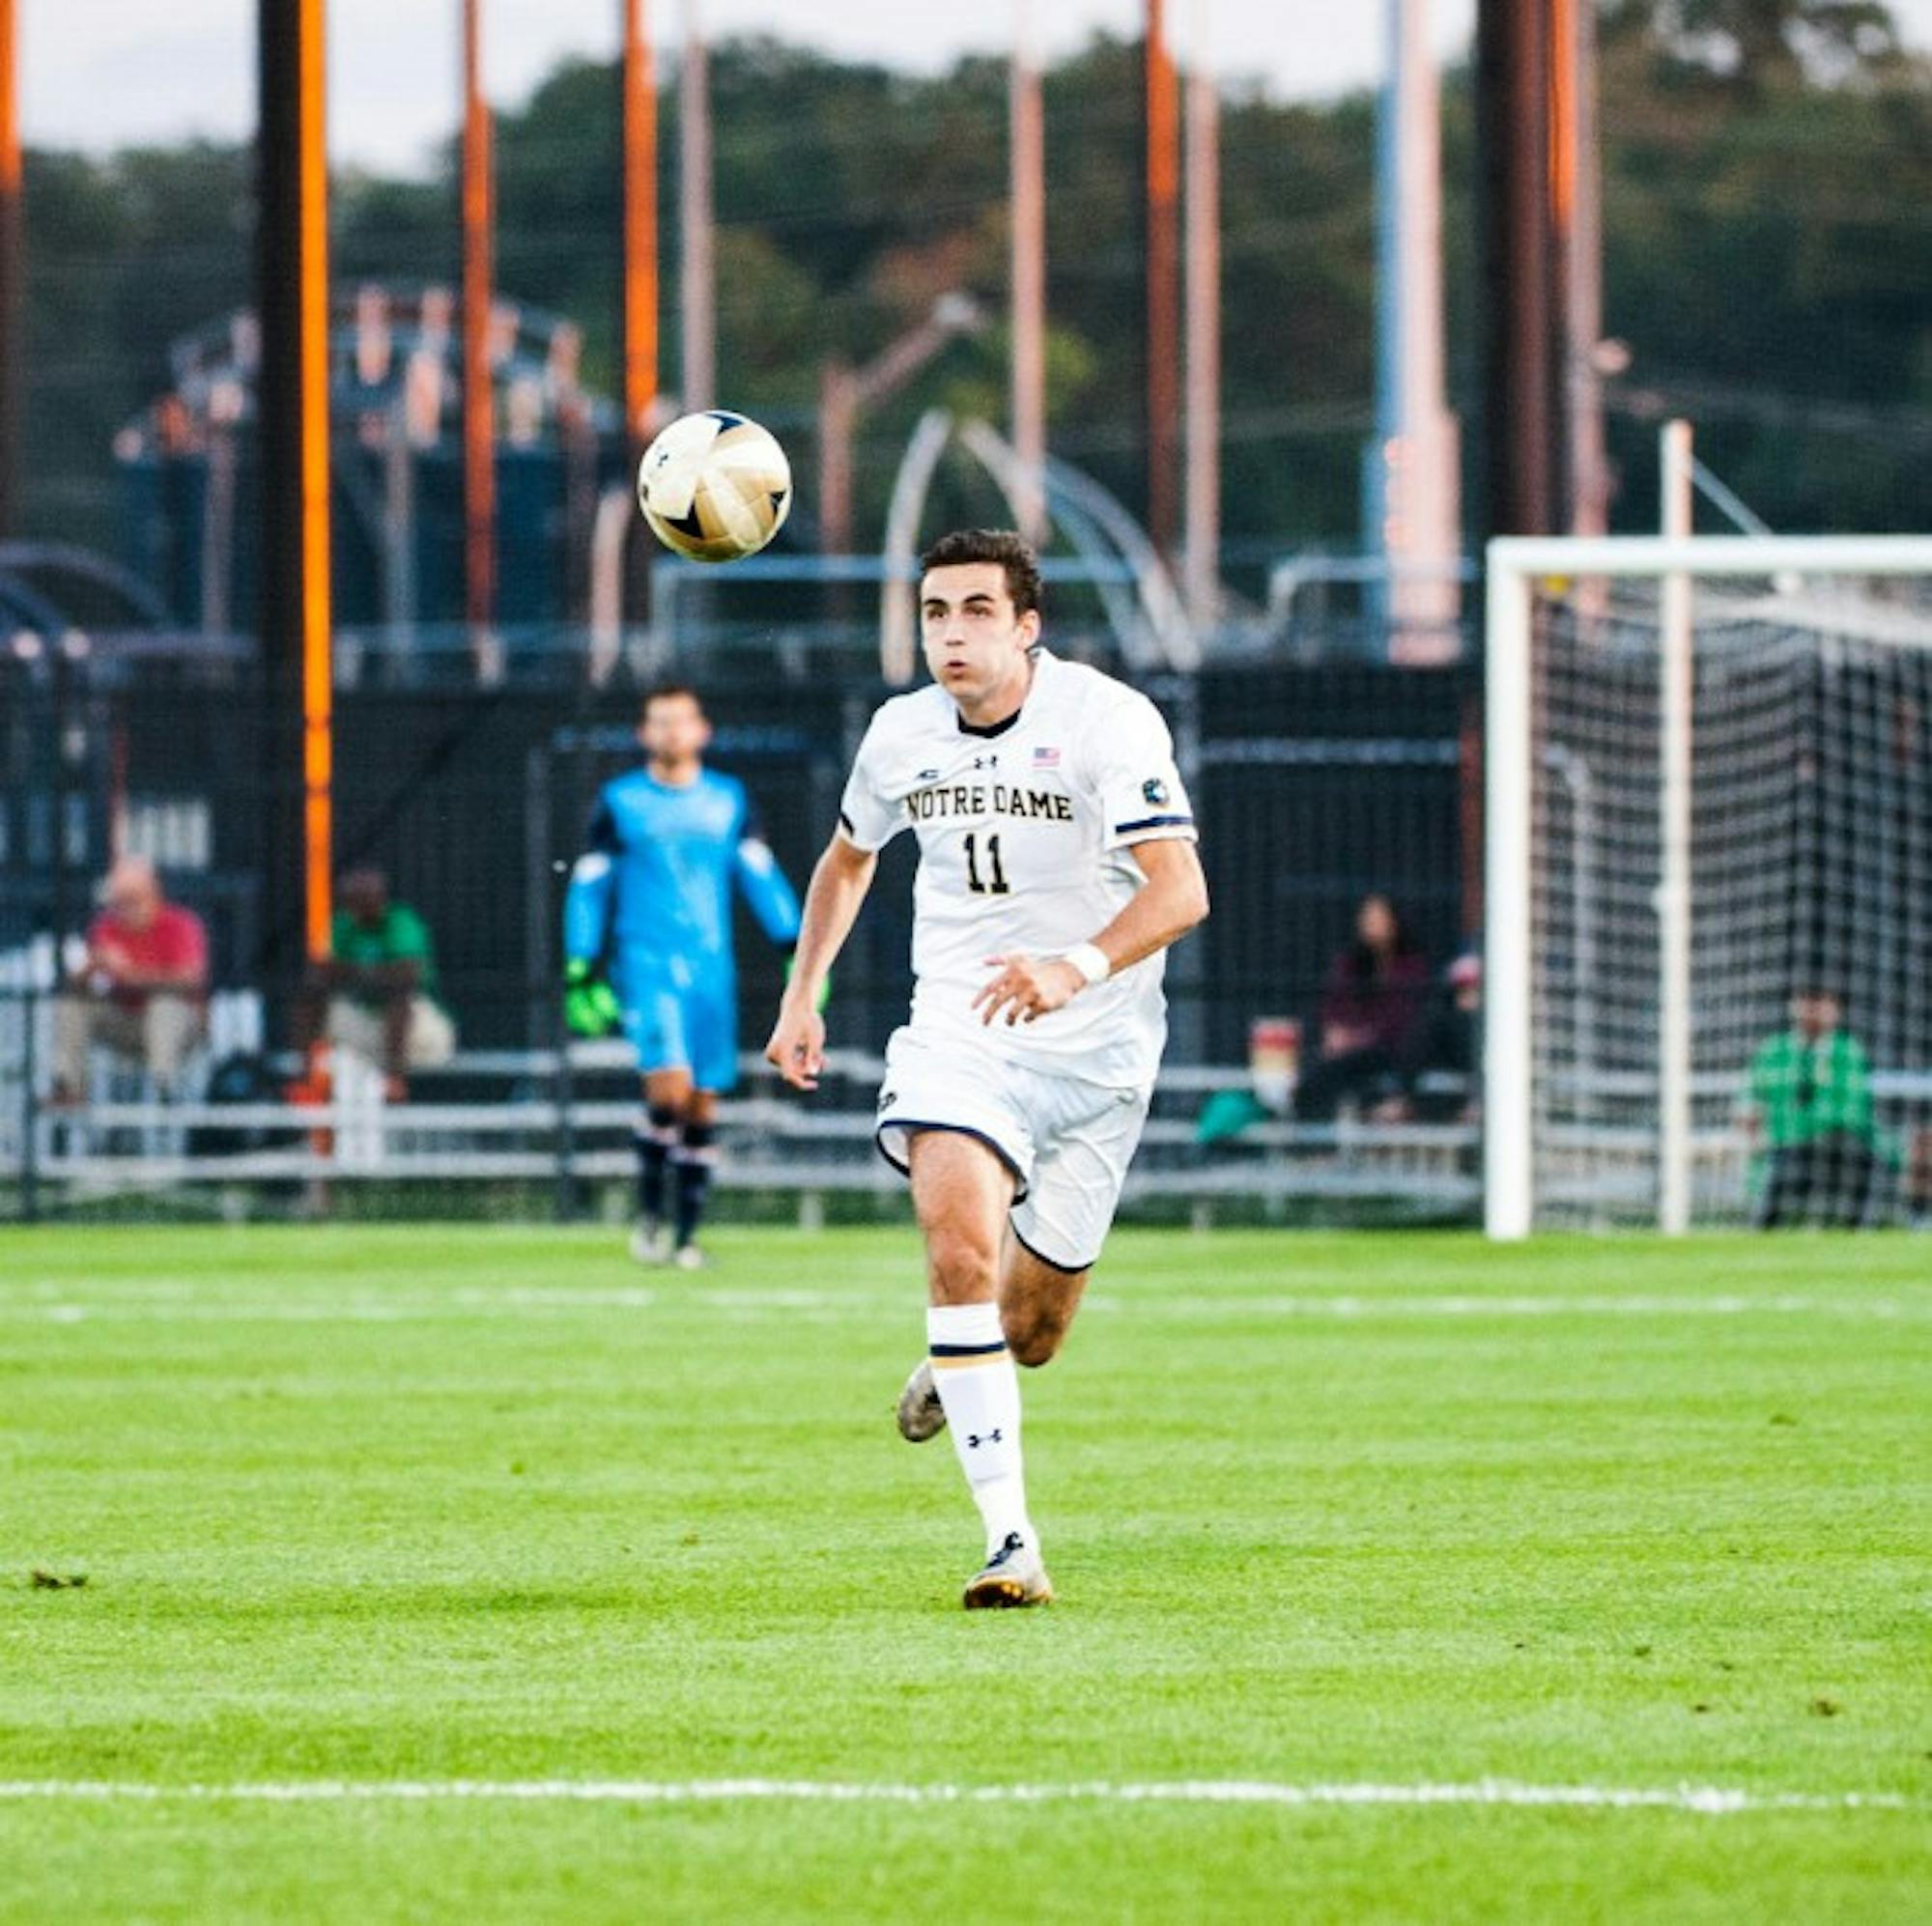 Sophomore defender Sean Dedrick runs after the ball in a game against Indiana on Oct. 4 at Alumni Stadium. The Irish won 4-0.